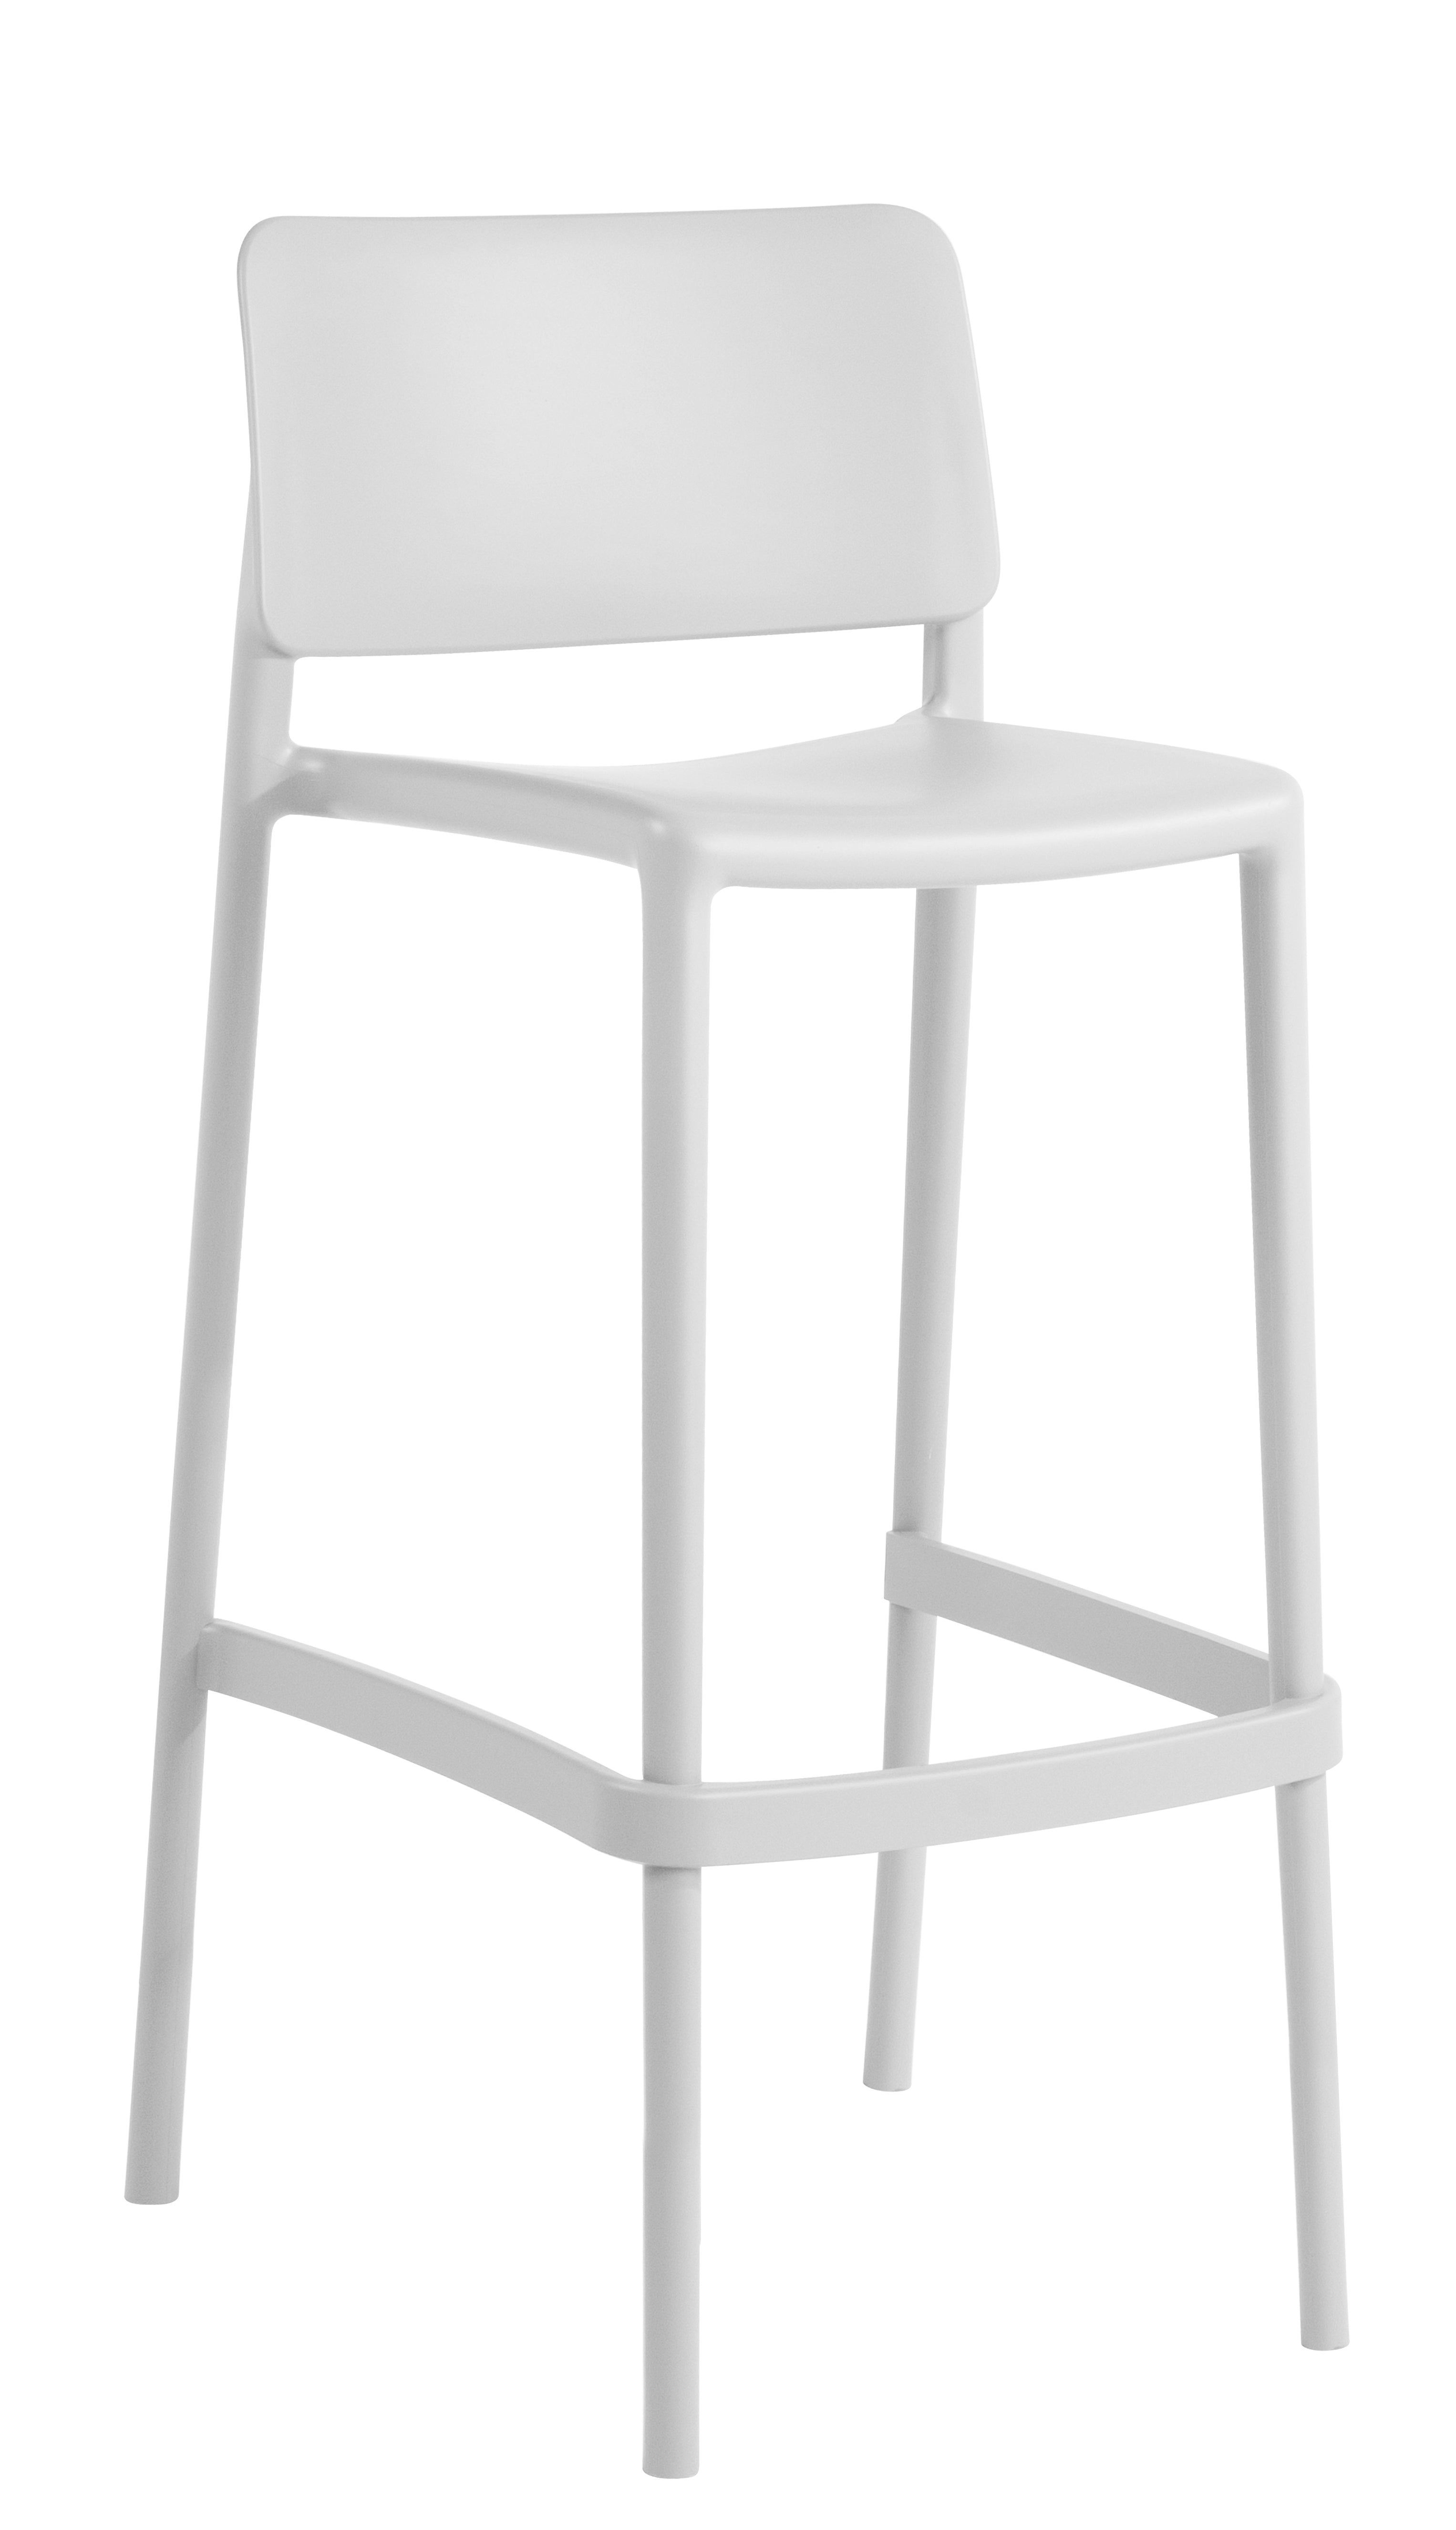 Cleo Patio Plastic Stackable Bar Height Bar Stool in White - (Set of 2)